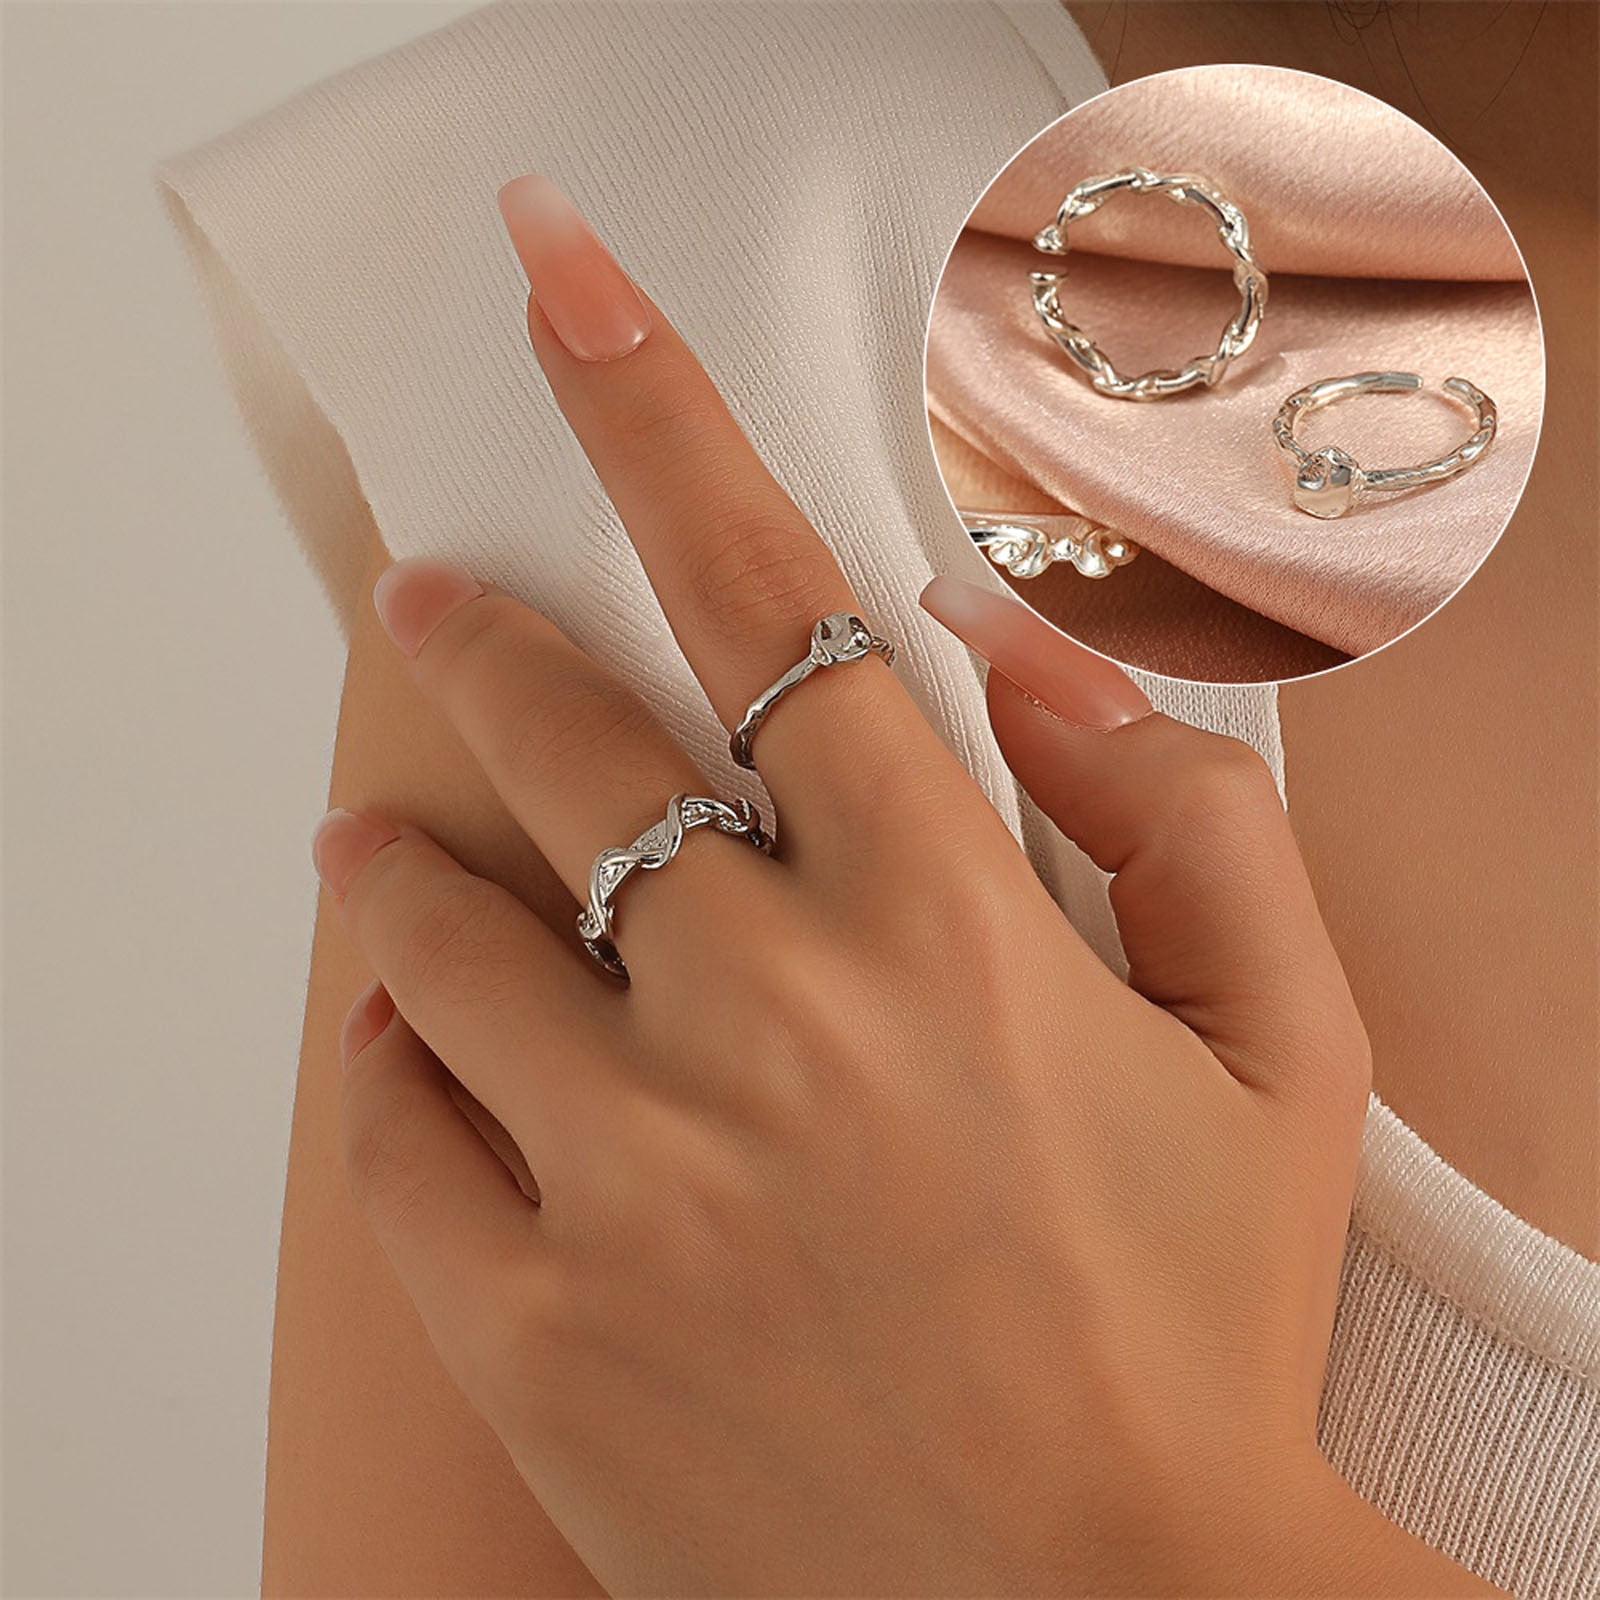 Jikolililili Irregular Ring Two-piece Index Finger Ring Personality  Fashionable and Versatile Jewelry Hypoallergenic Rings Christmas 2022 Deals  Clearance 